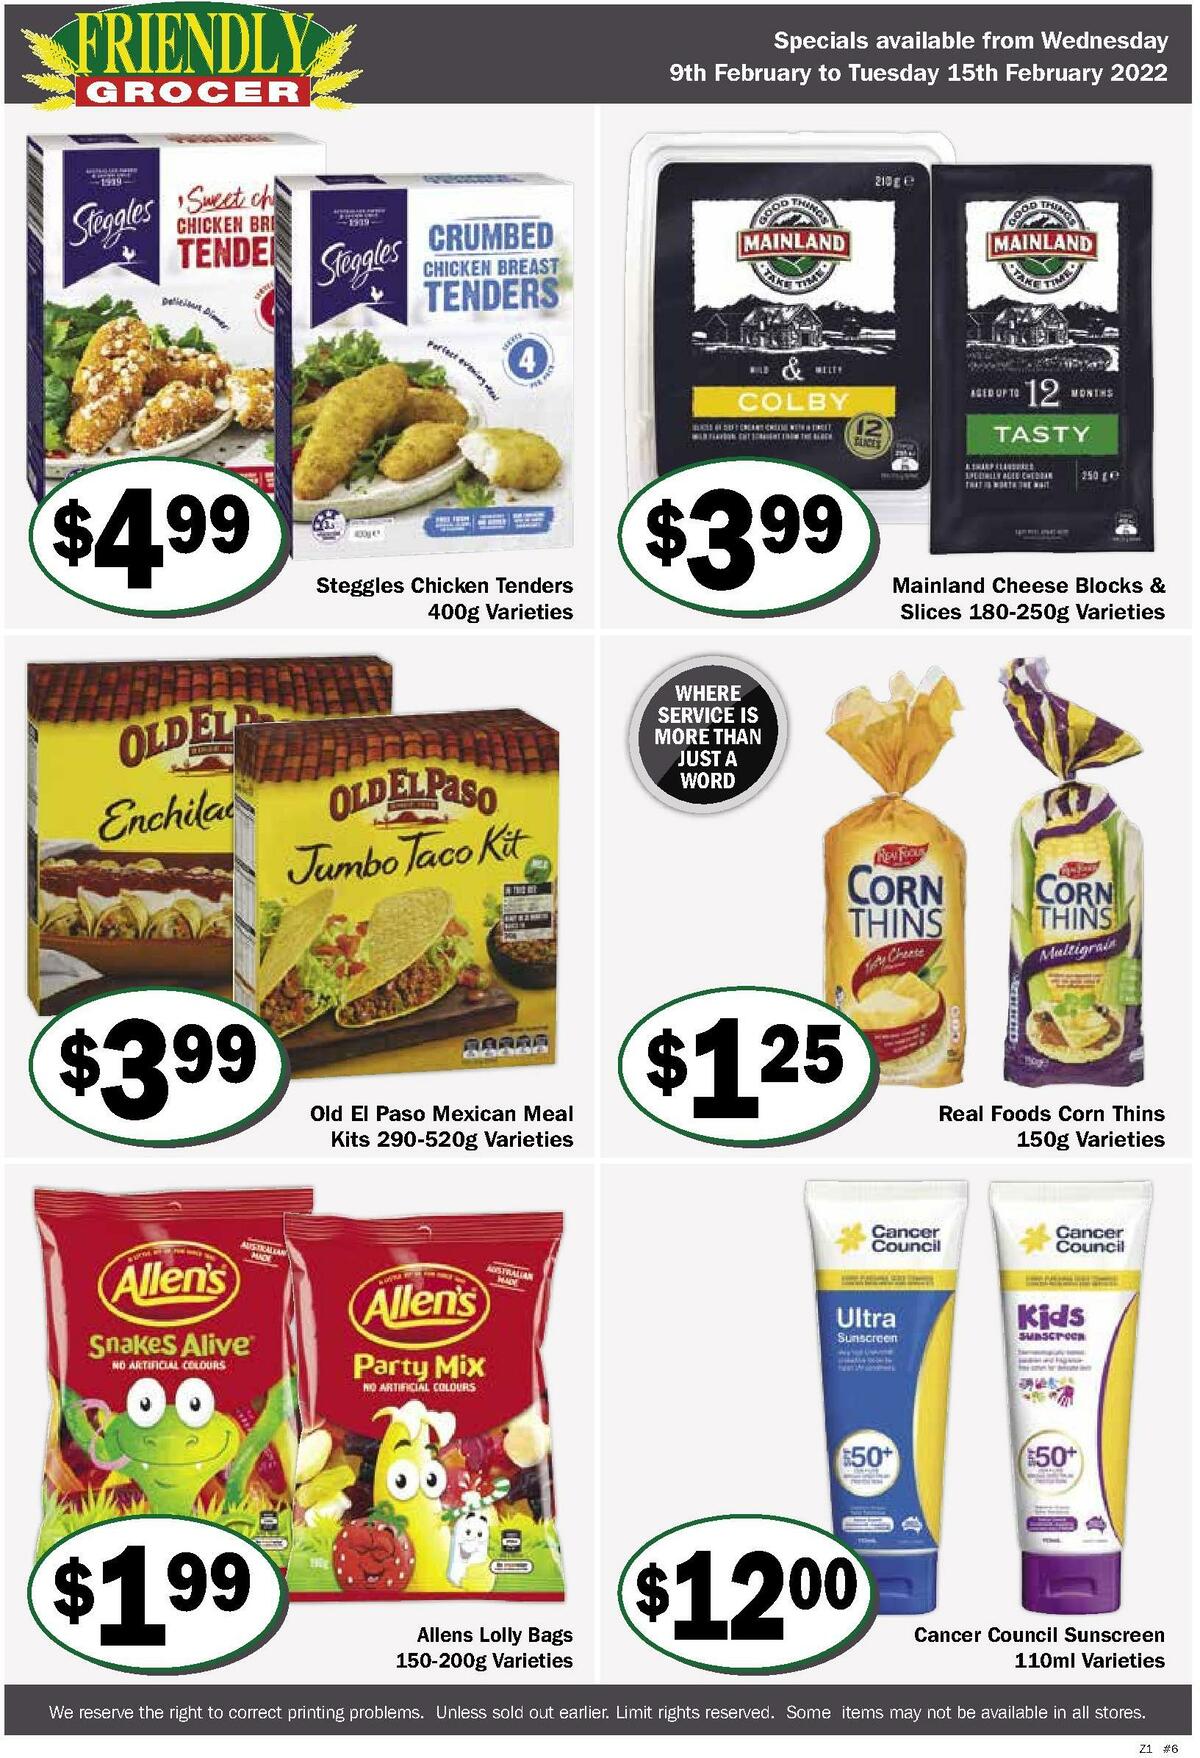 Friendly Grocer Catalogues from 9 February